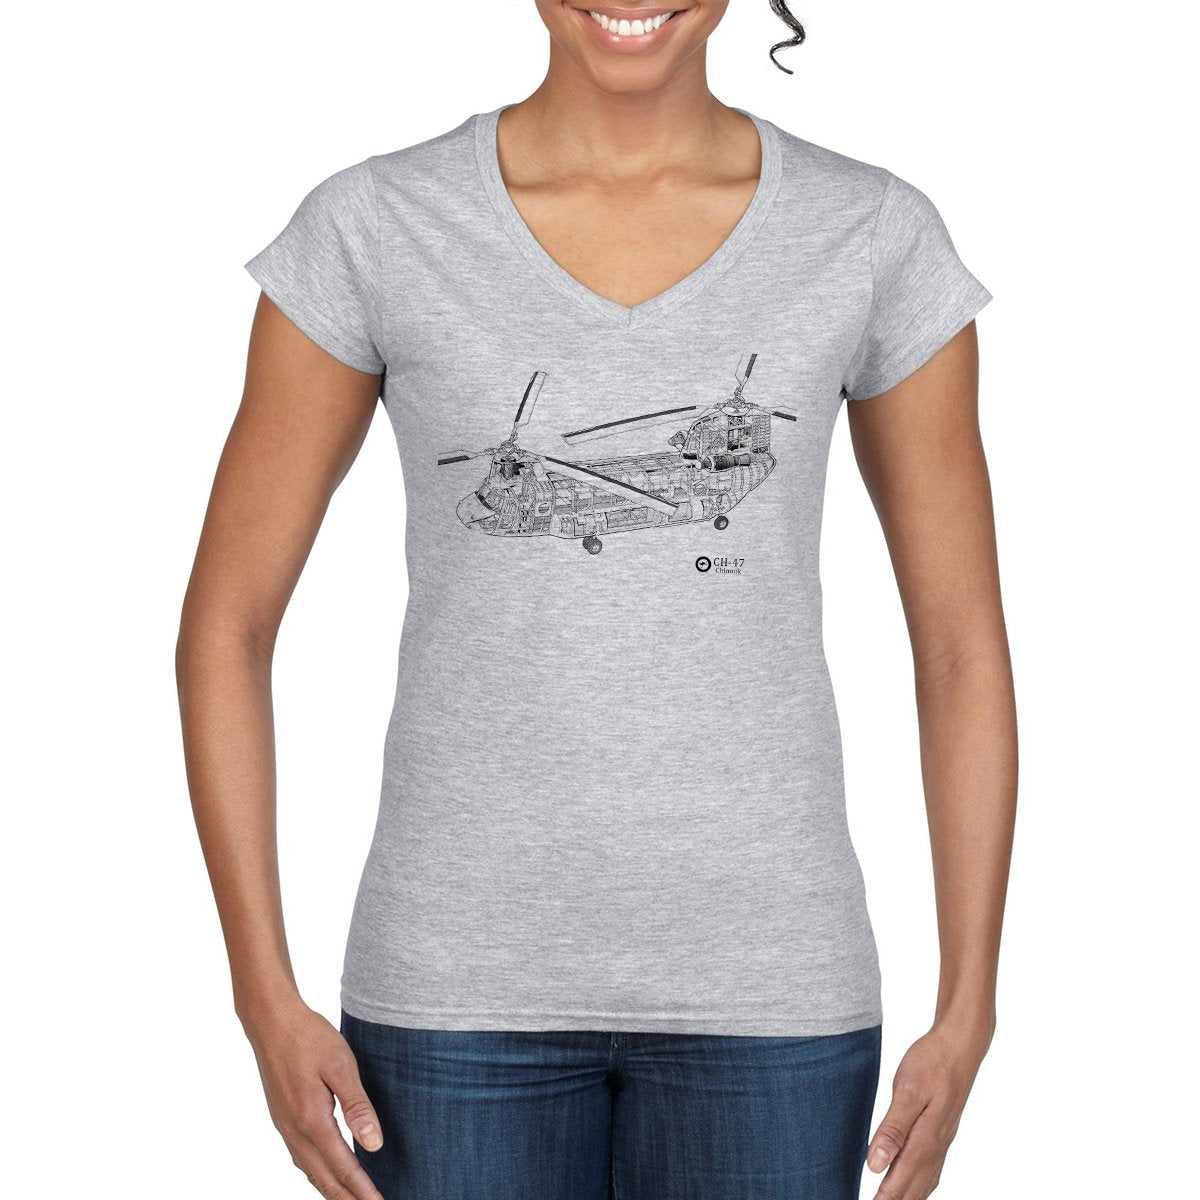 CHINOOK CUTAWAY Woman's Semi-Fitted V Neck T-Shirt